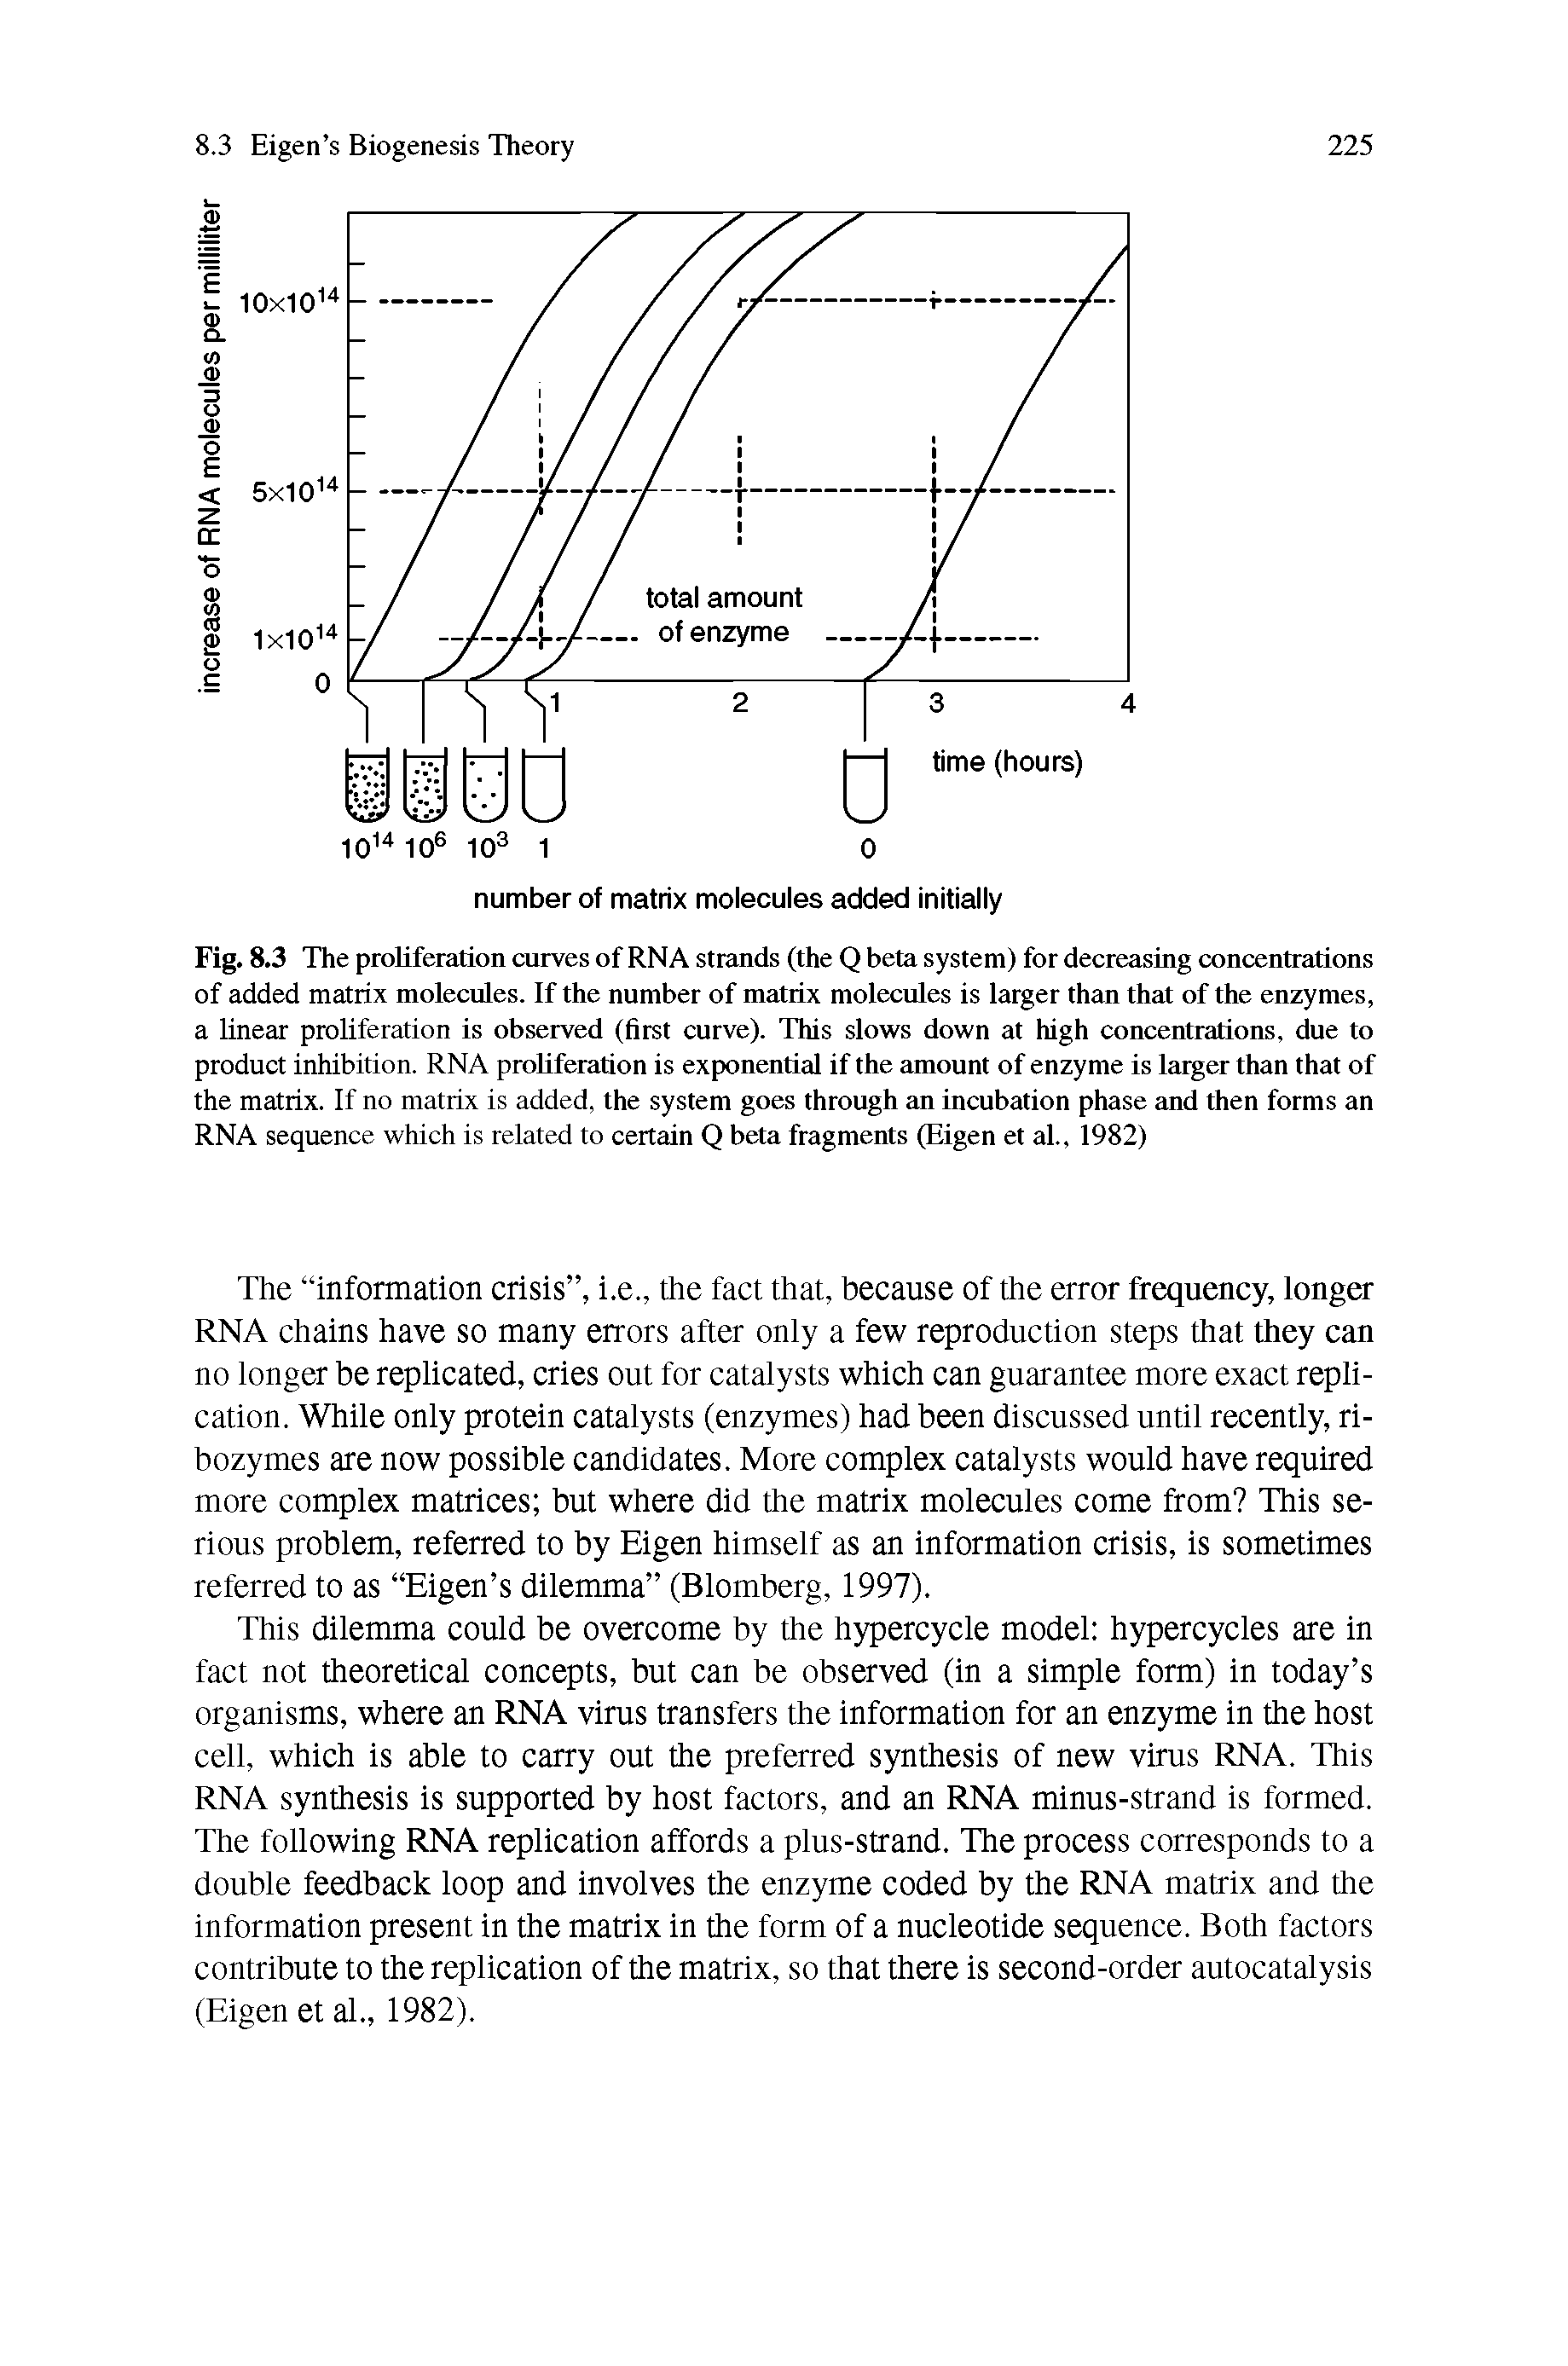 Fig. 8.3 The proliferation curves of RNA strands (the Q beta system) for decreasing concentrations of added matrix molecules. If the number of matrix molecules is larger than that of the enzymes, a linear proliferation is observed (first curve). This slows down at high concentrations, due to product inhibition. RNA proliferation is exponential if the amount of enzyme is larger than that of the matrix. If no matrix is added, the system goes through an incubation phase and then forms an RNA sequence which is related to certain Q beta fragments (Eigen et al., 1982)...